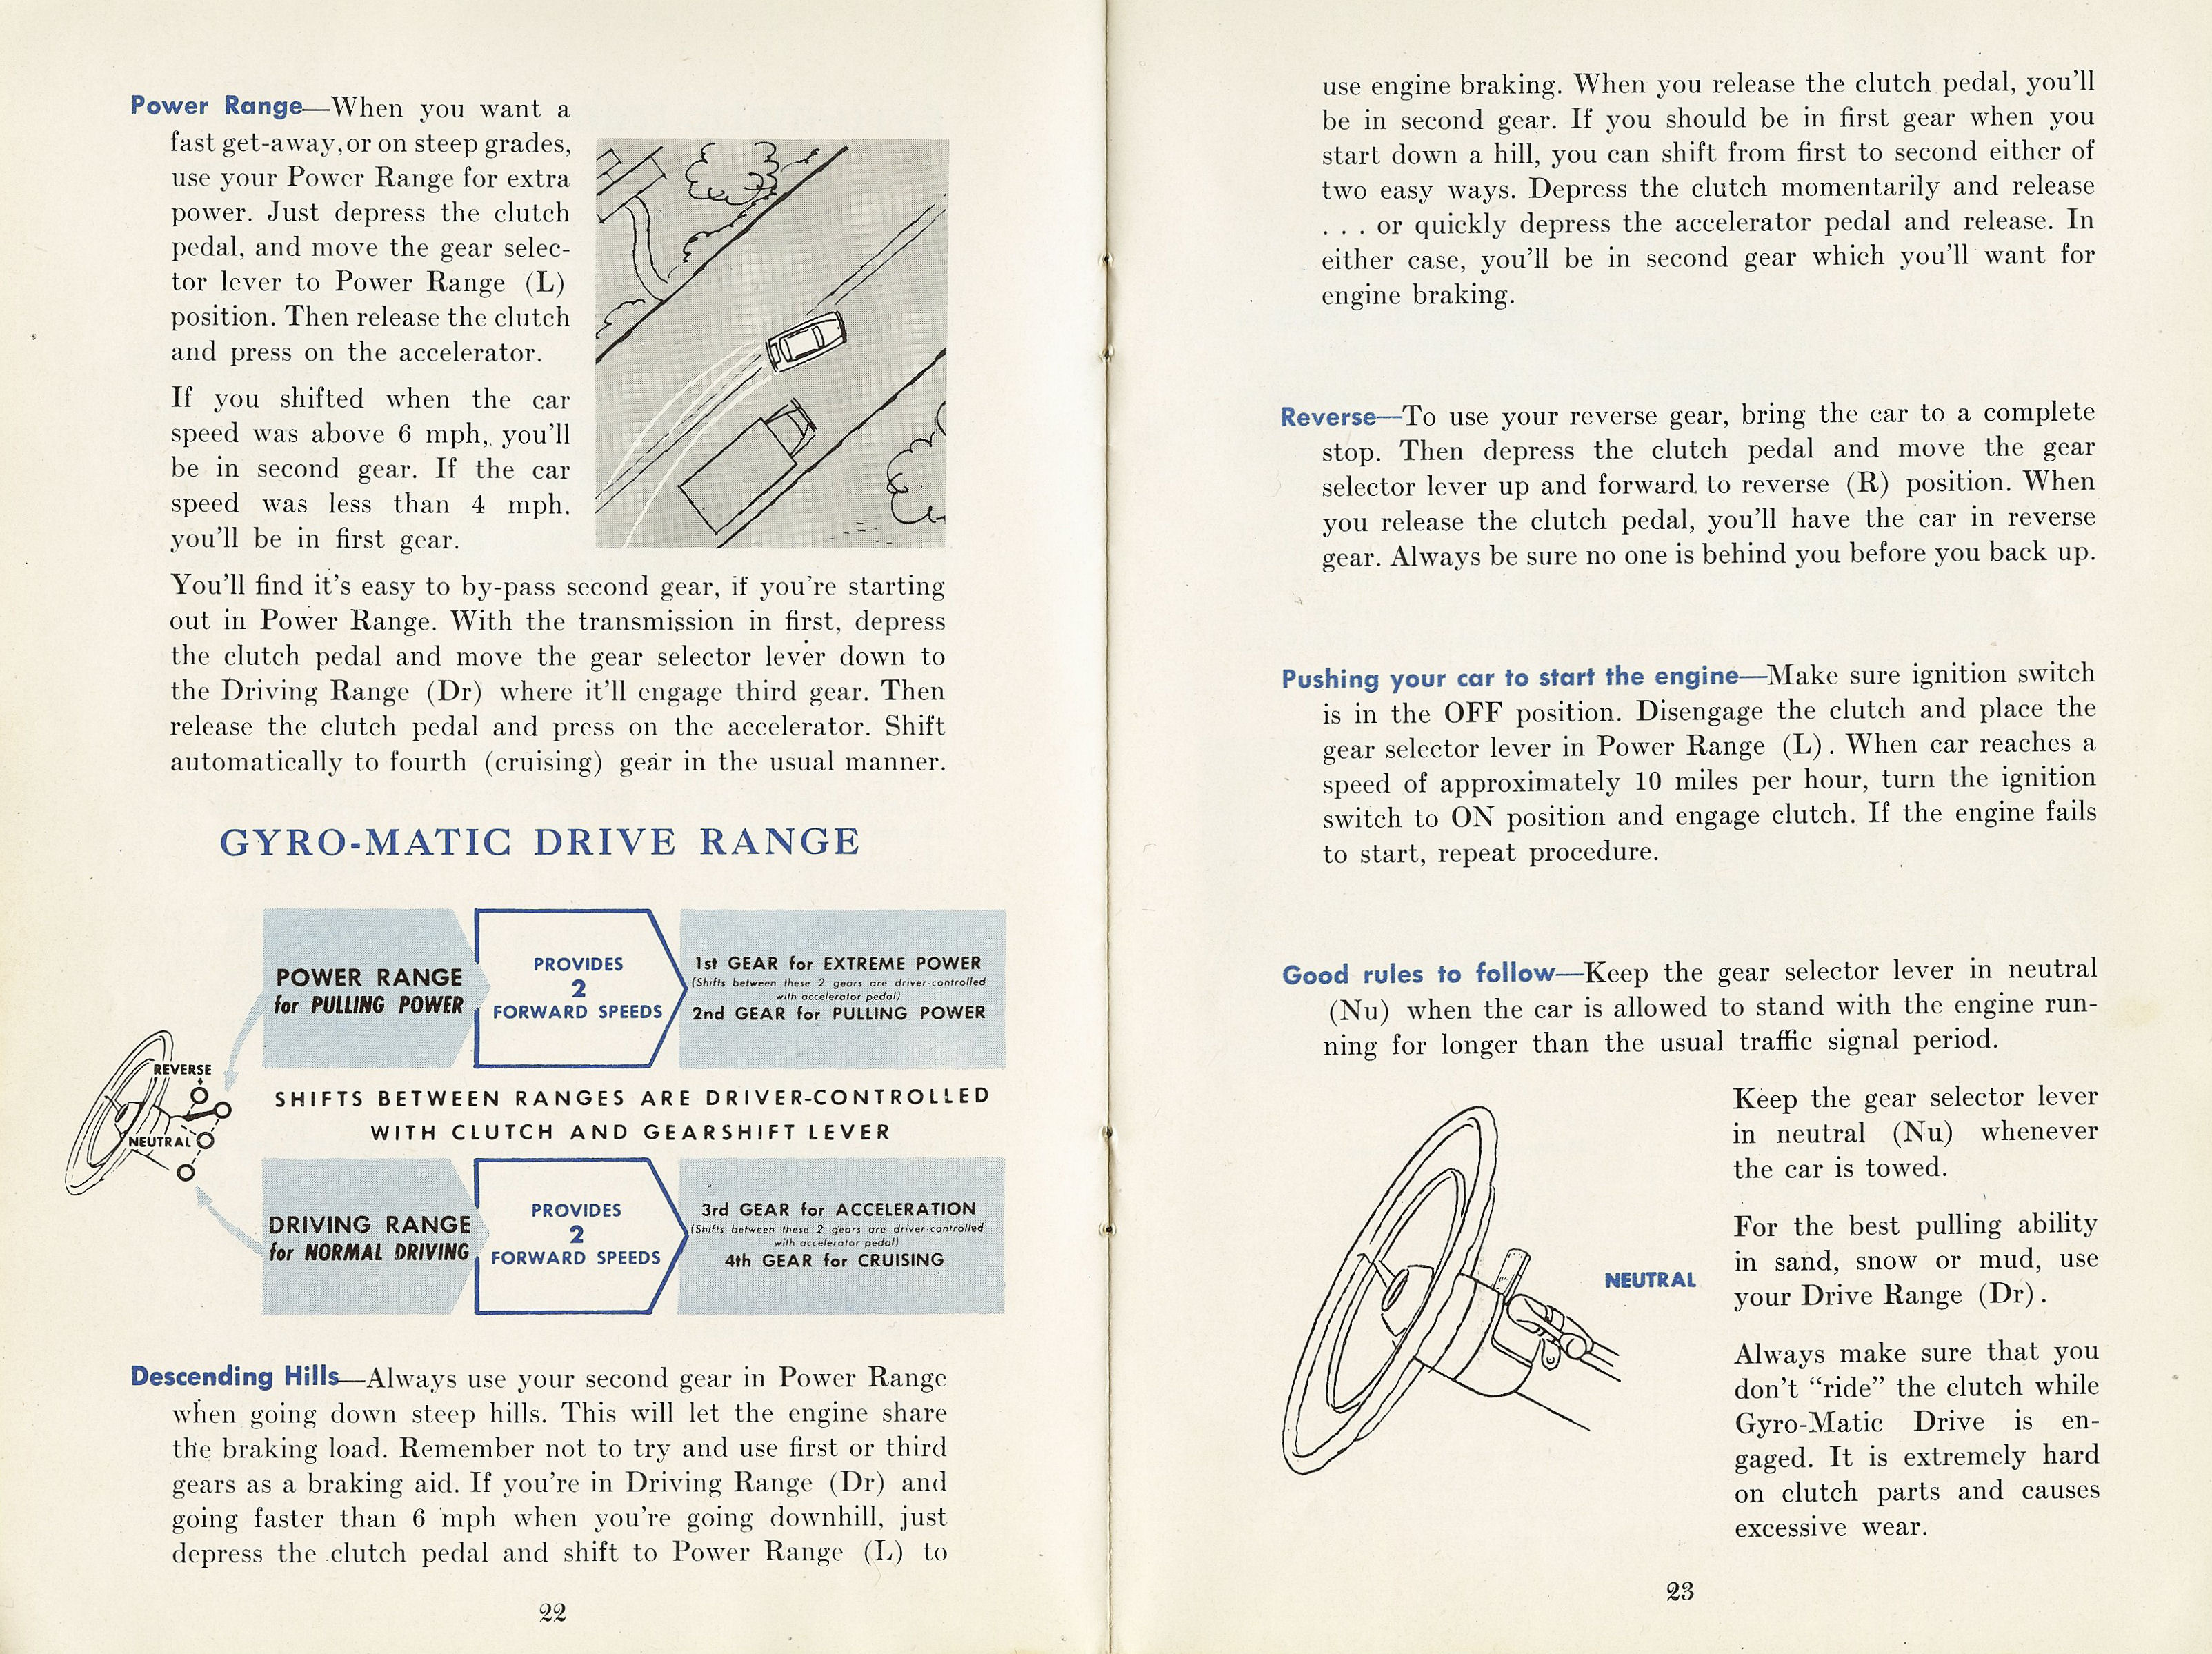 1954 Dodge Owners Manual-22-23